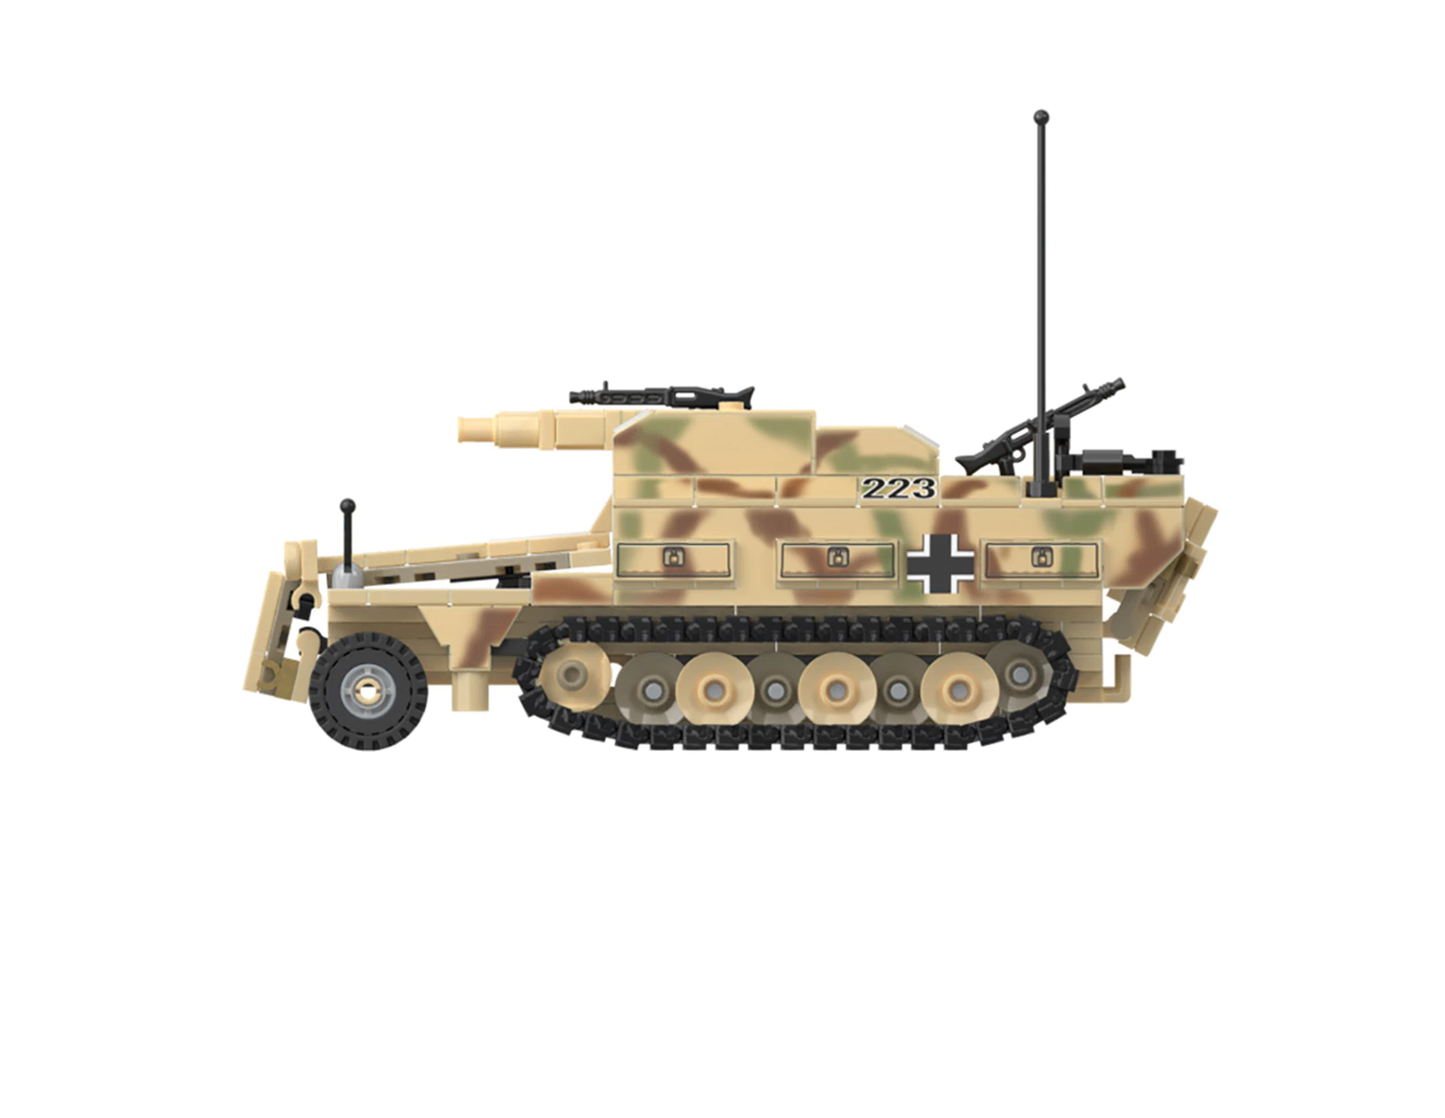 Load image into Gallery viewer, SdKfz 251 Ausf D - German Half Track Three-In-One Kit - MOMCOM inc.
